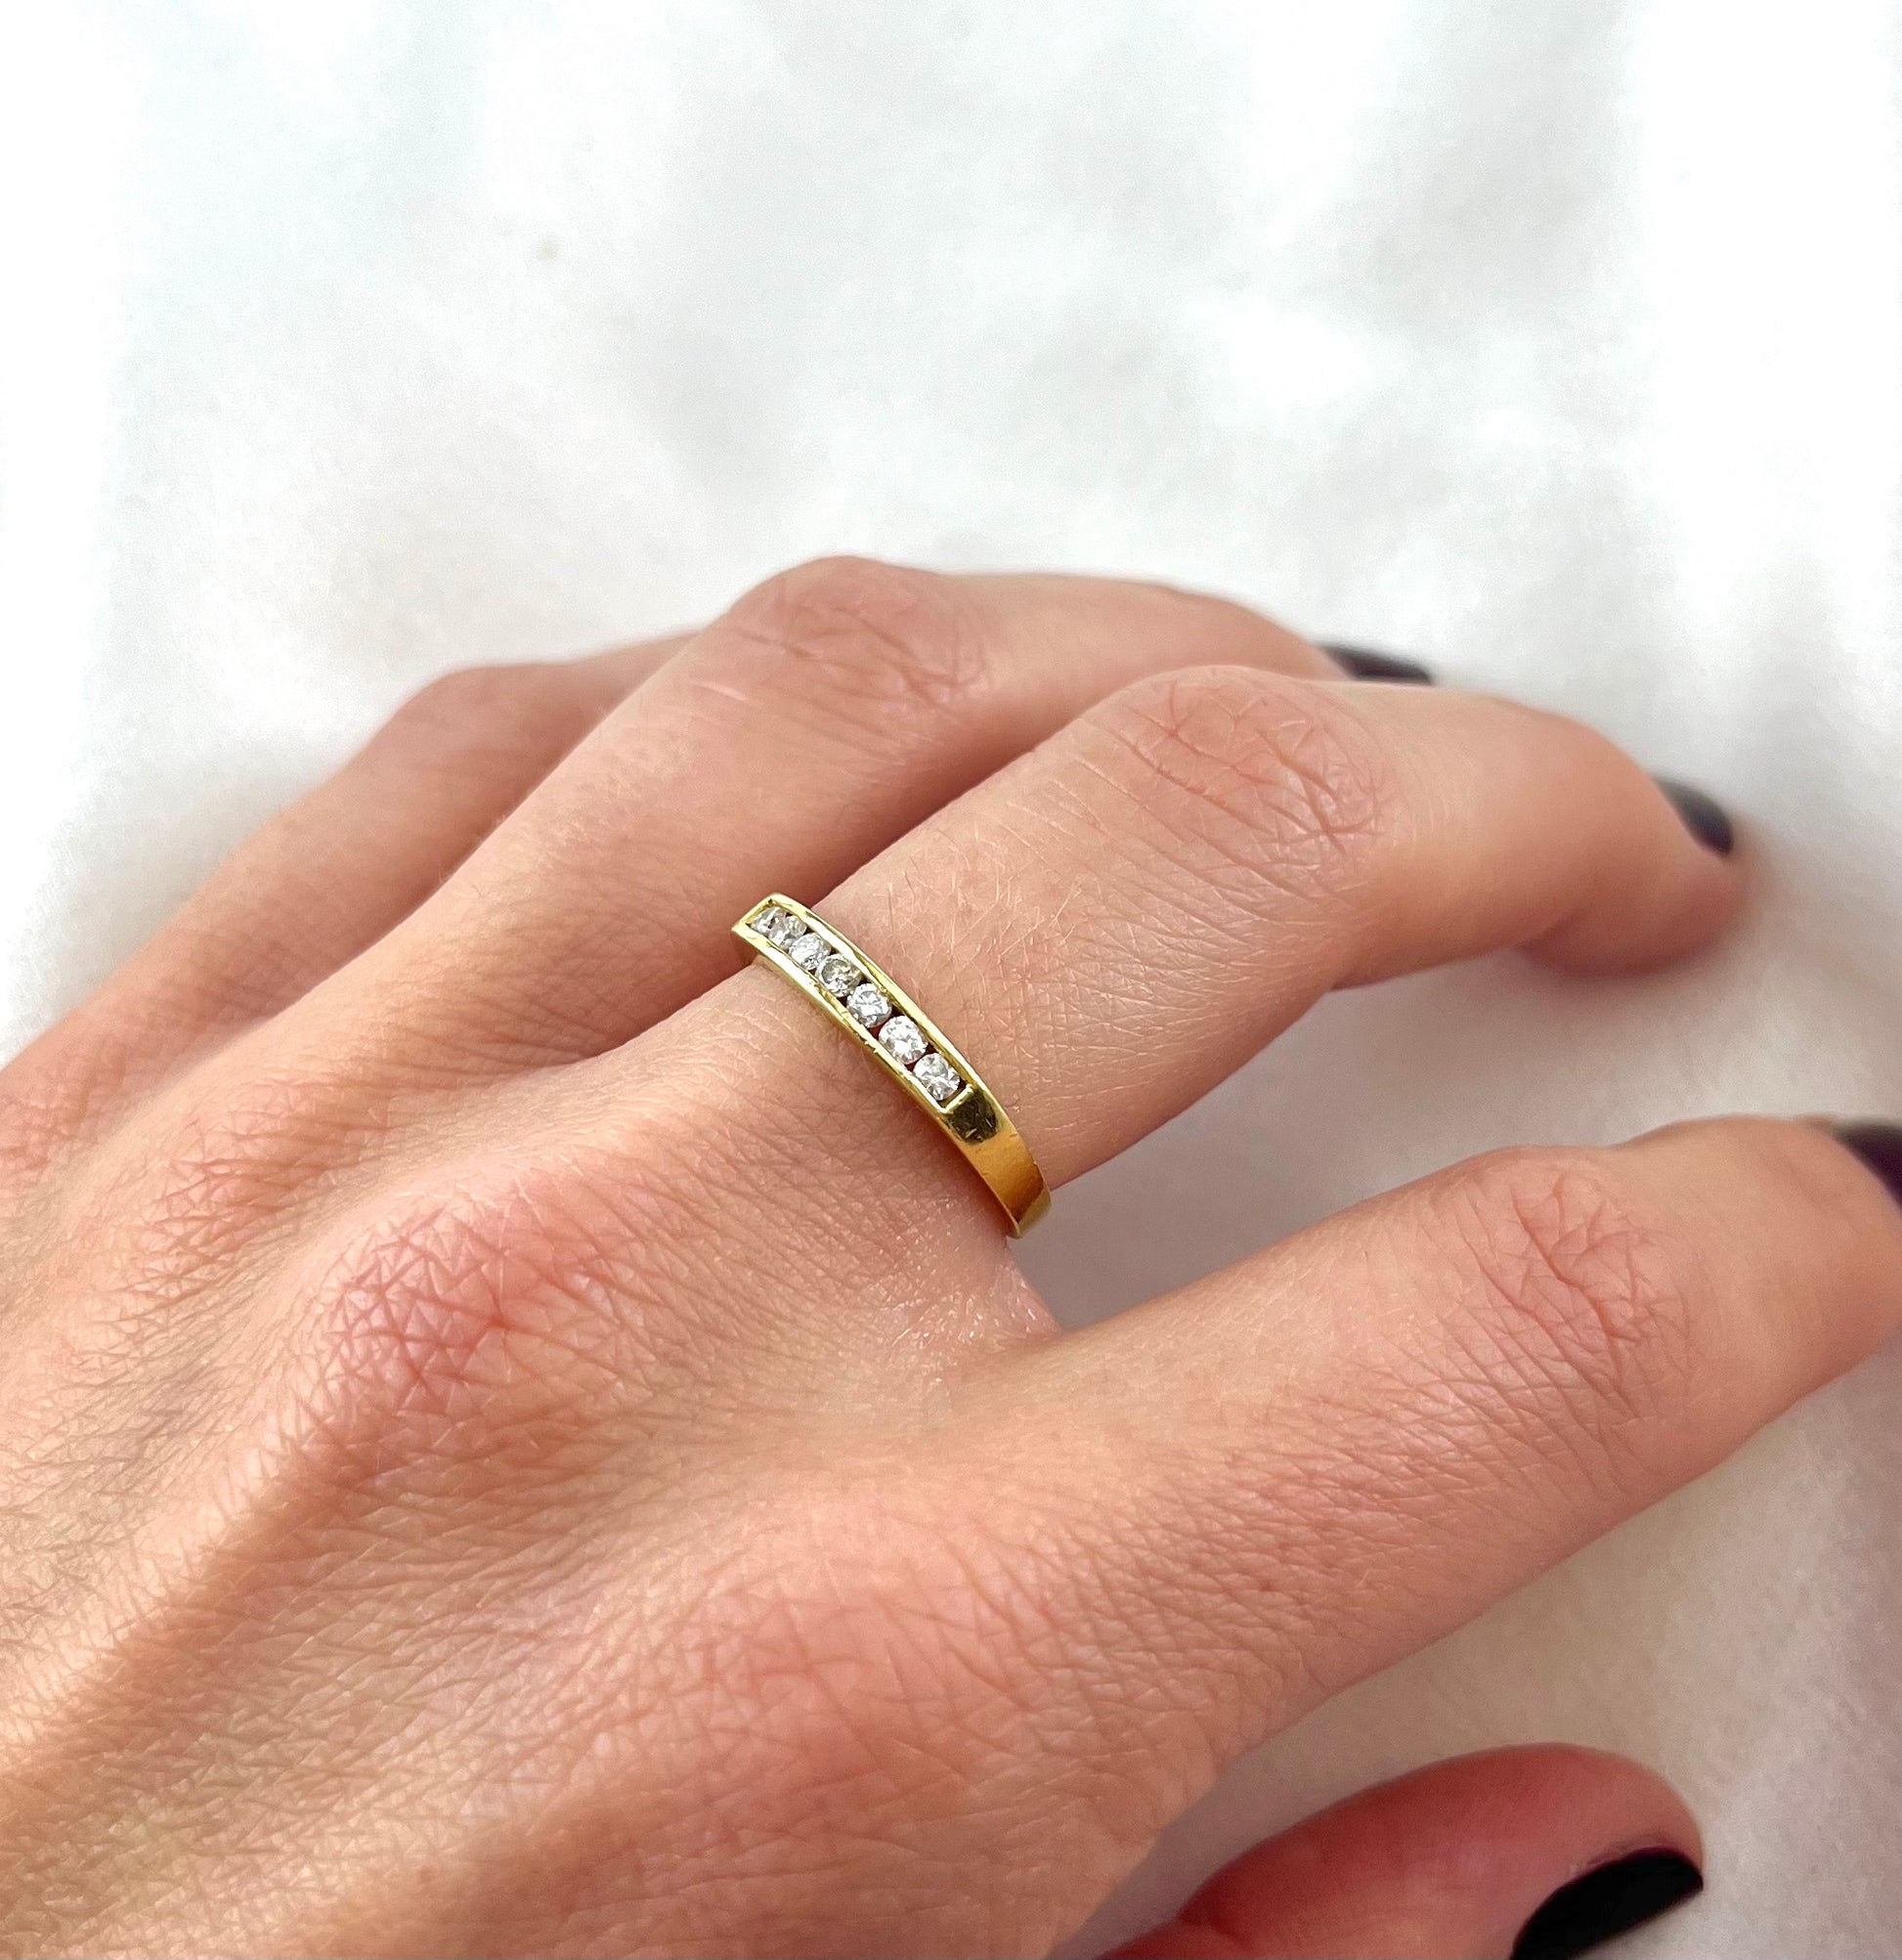 Vintage 18ct Gold Seven Stone Diamond Half Eternity Ring with Channel Setting, 0.25ct Size N + 0.5